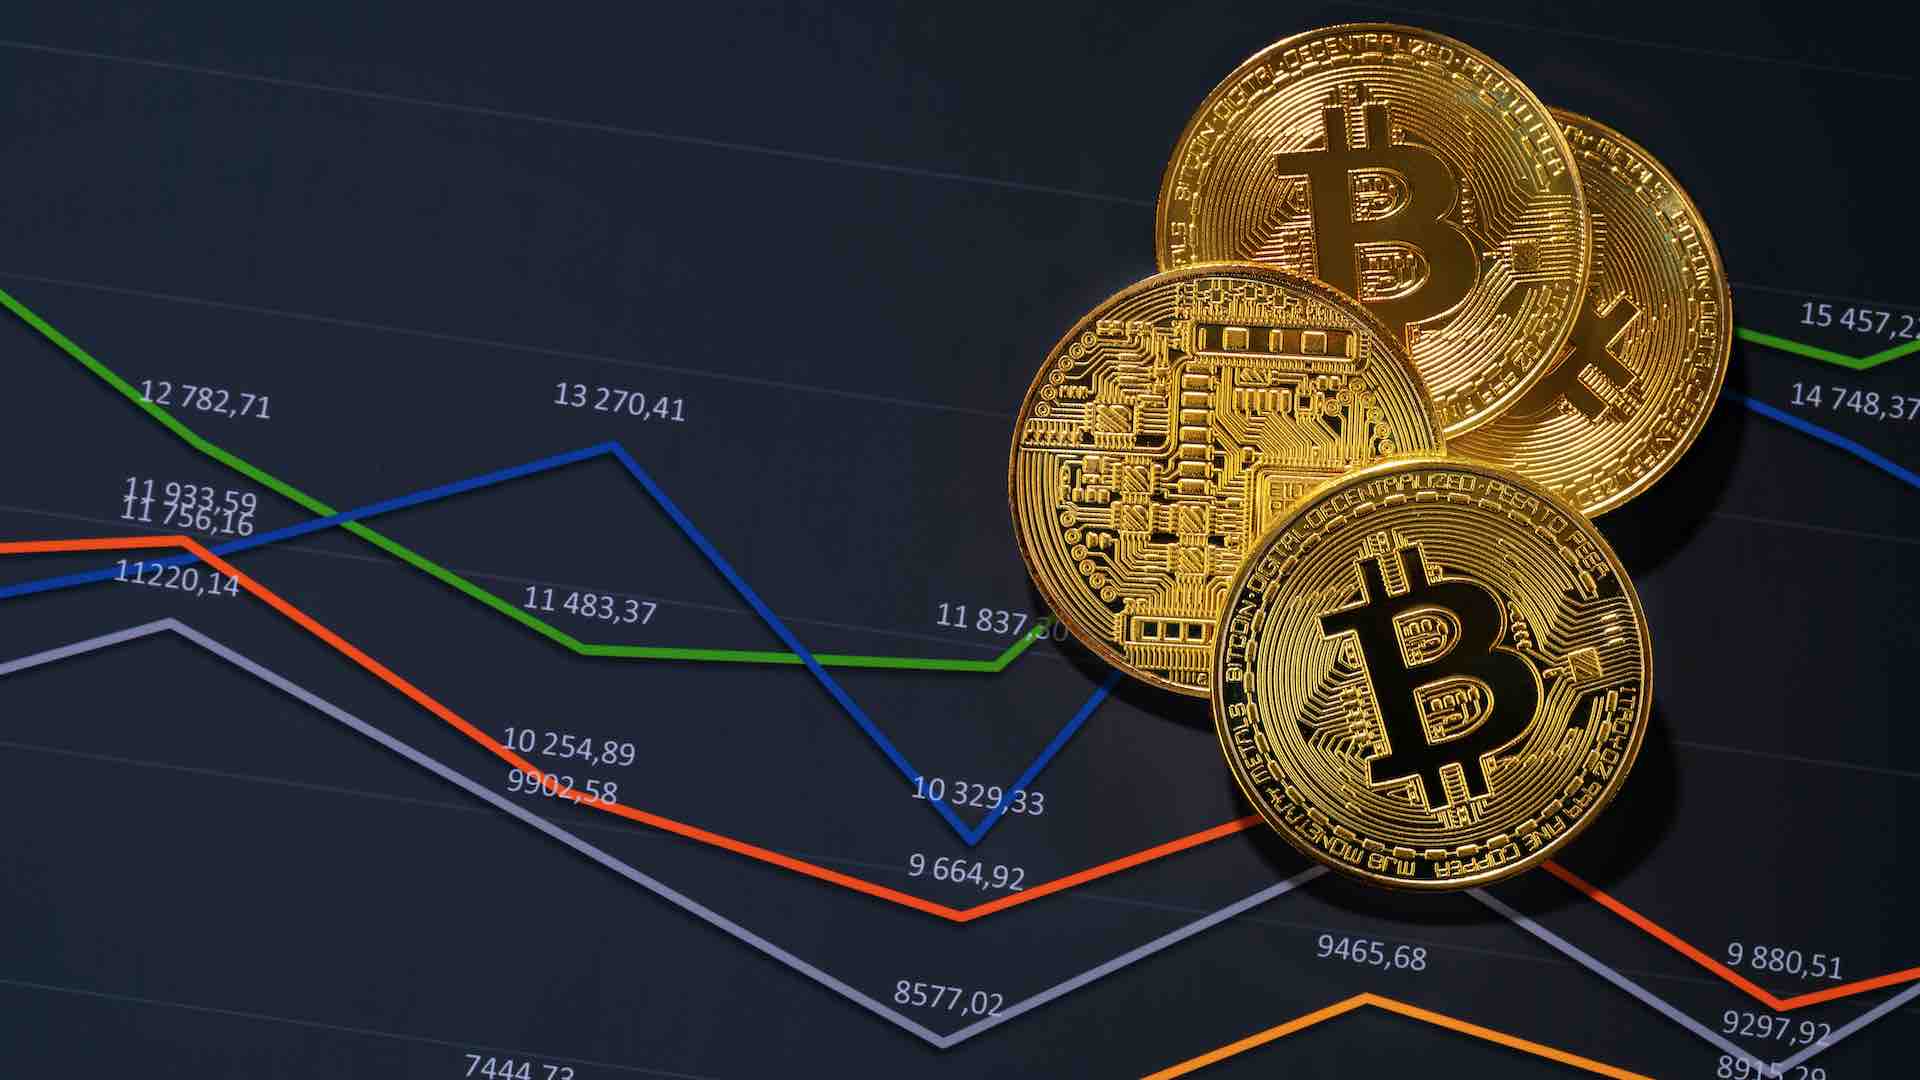 Bitcoin's rollercoaster ride with halving event approaching